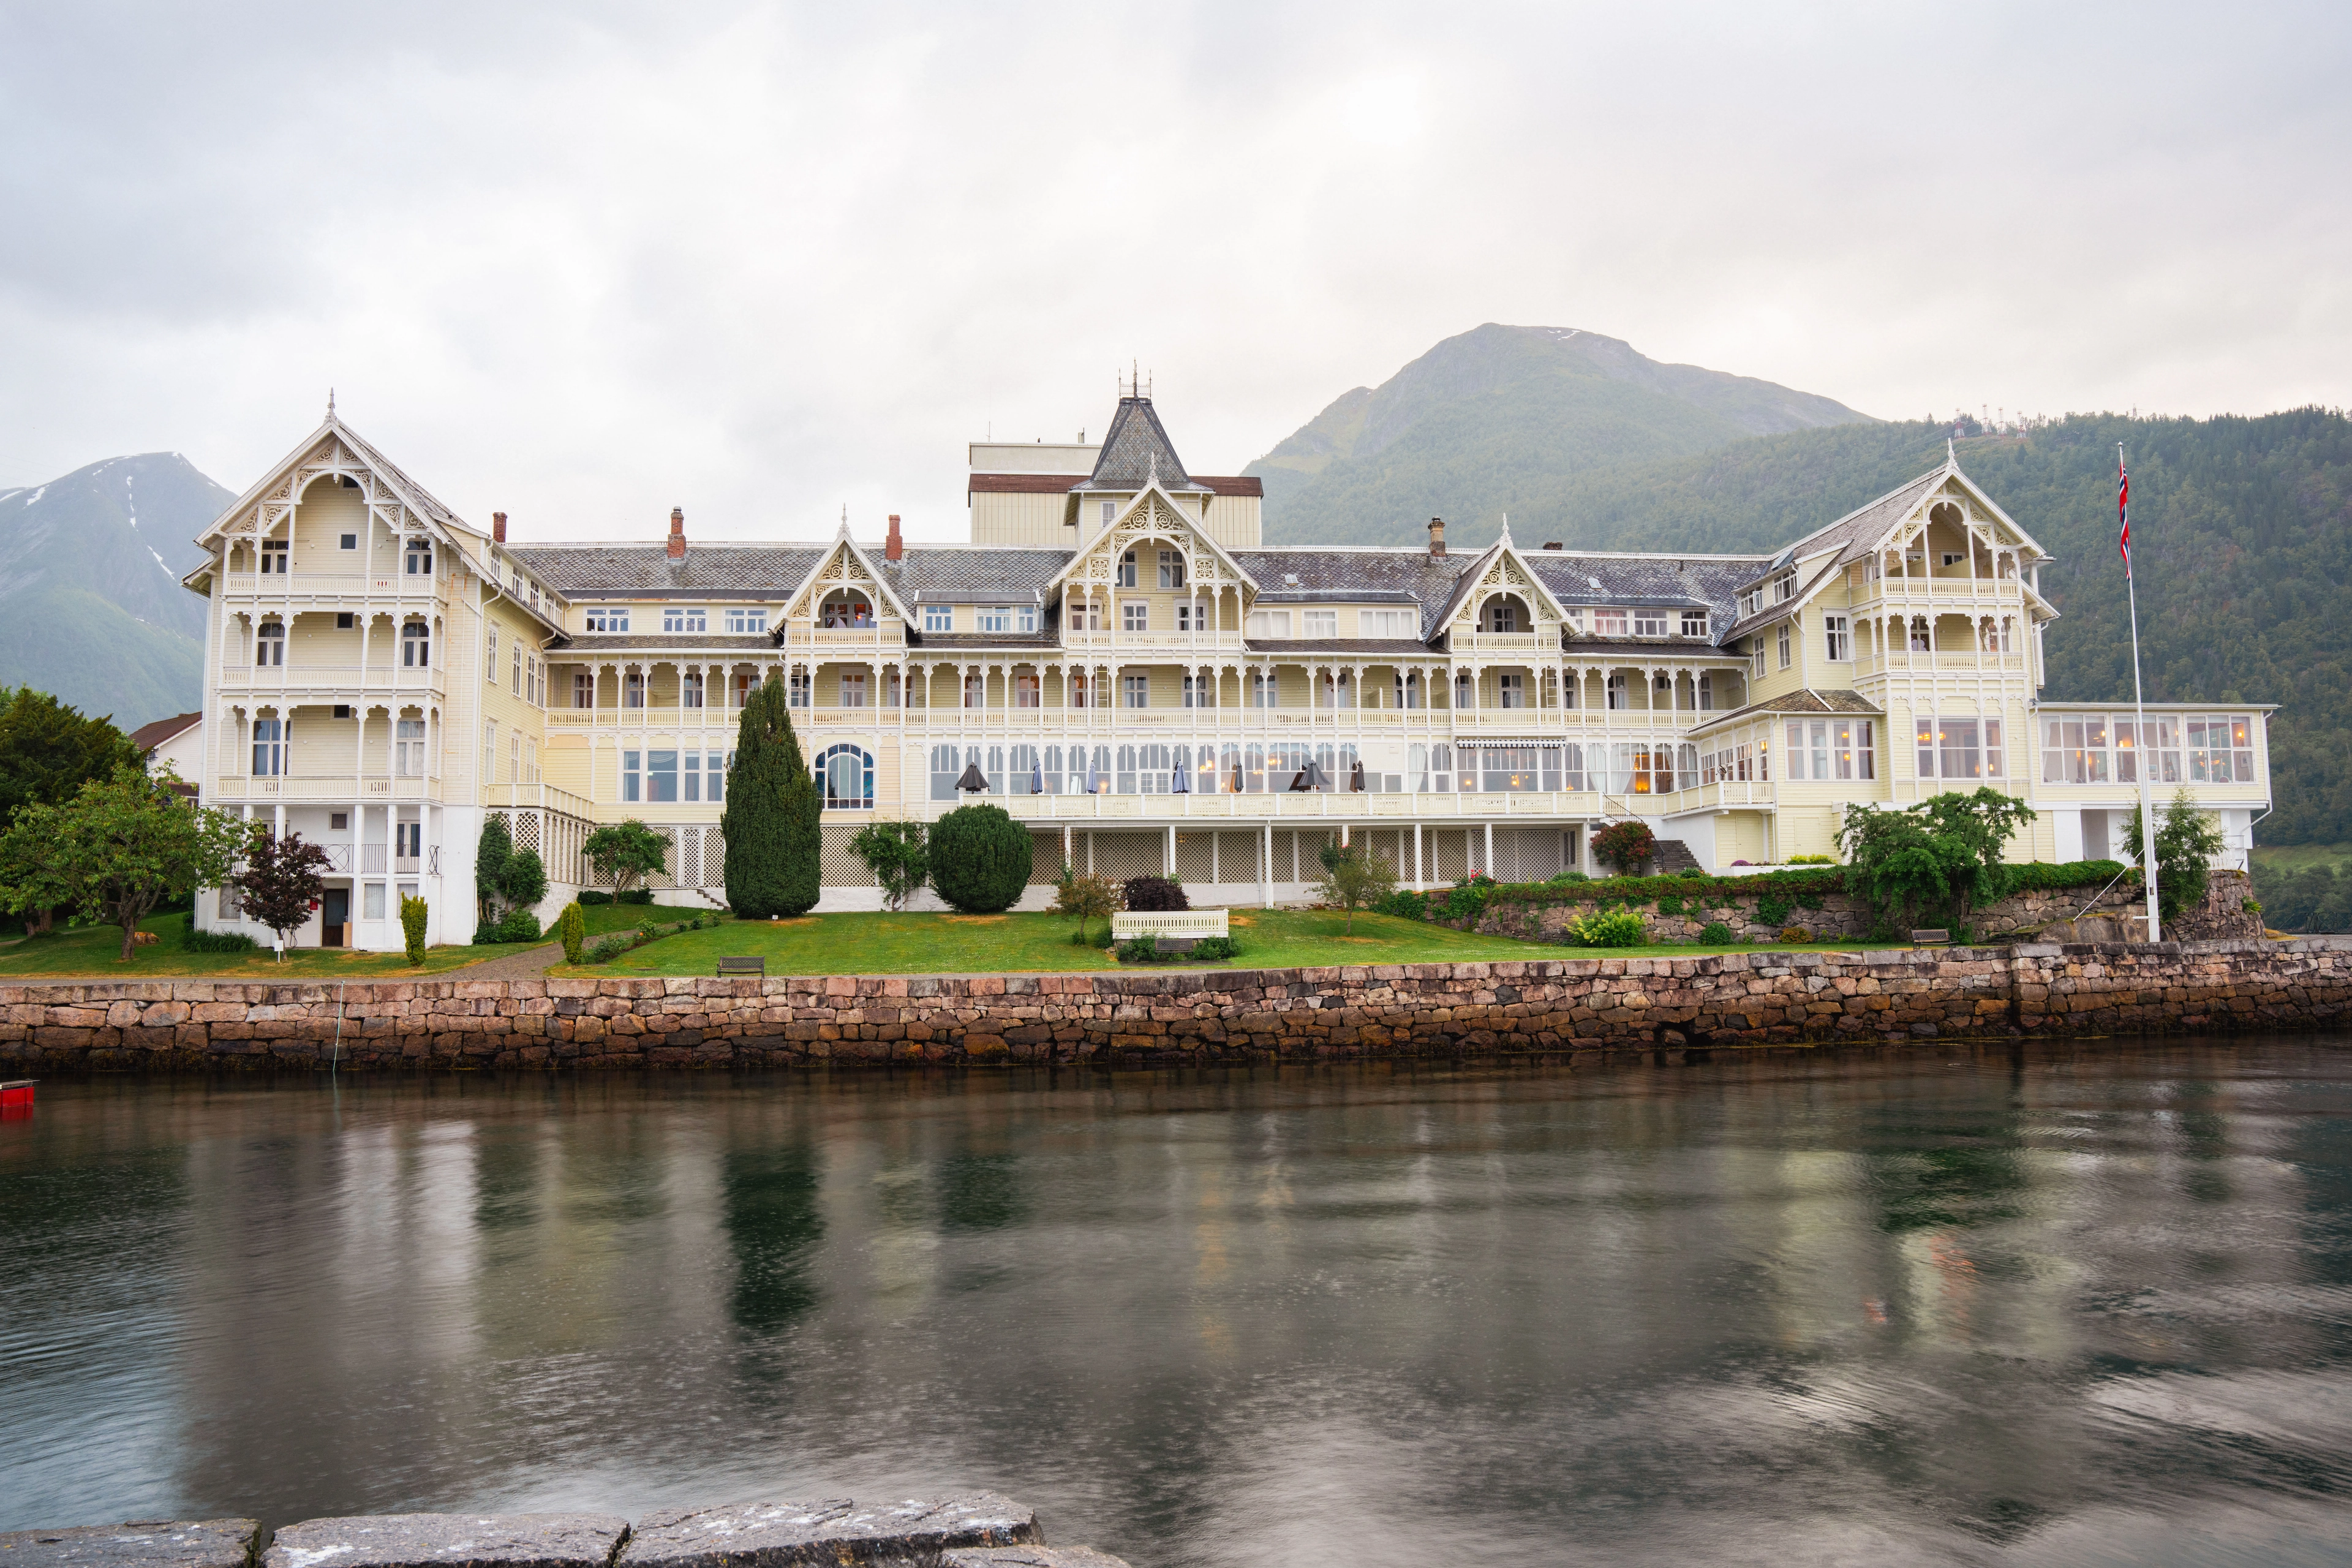 Kviknes Hotel right by the Sognefjord - Balestrand, Norway